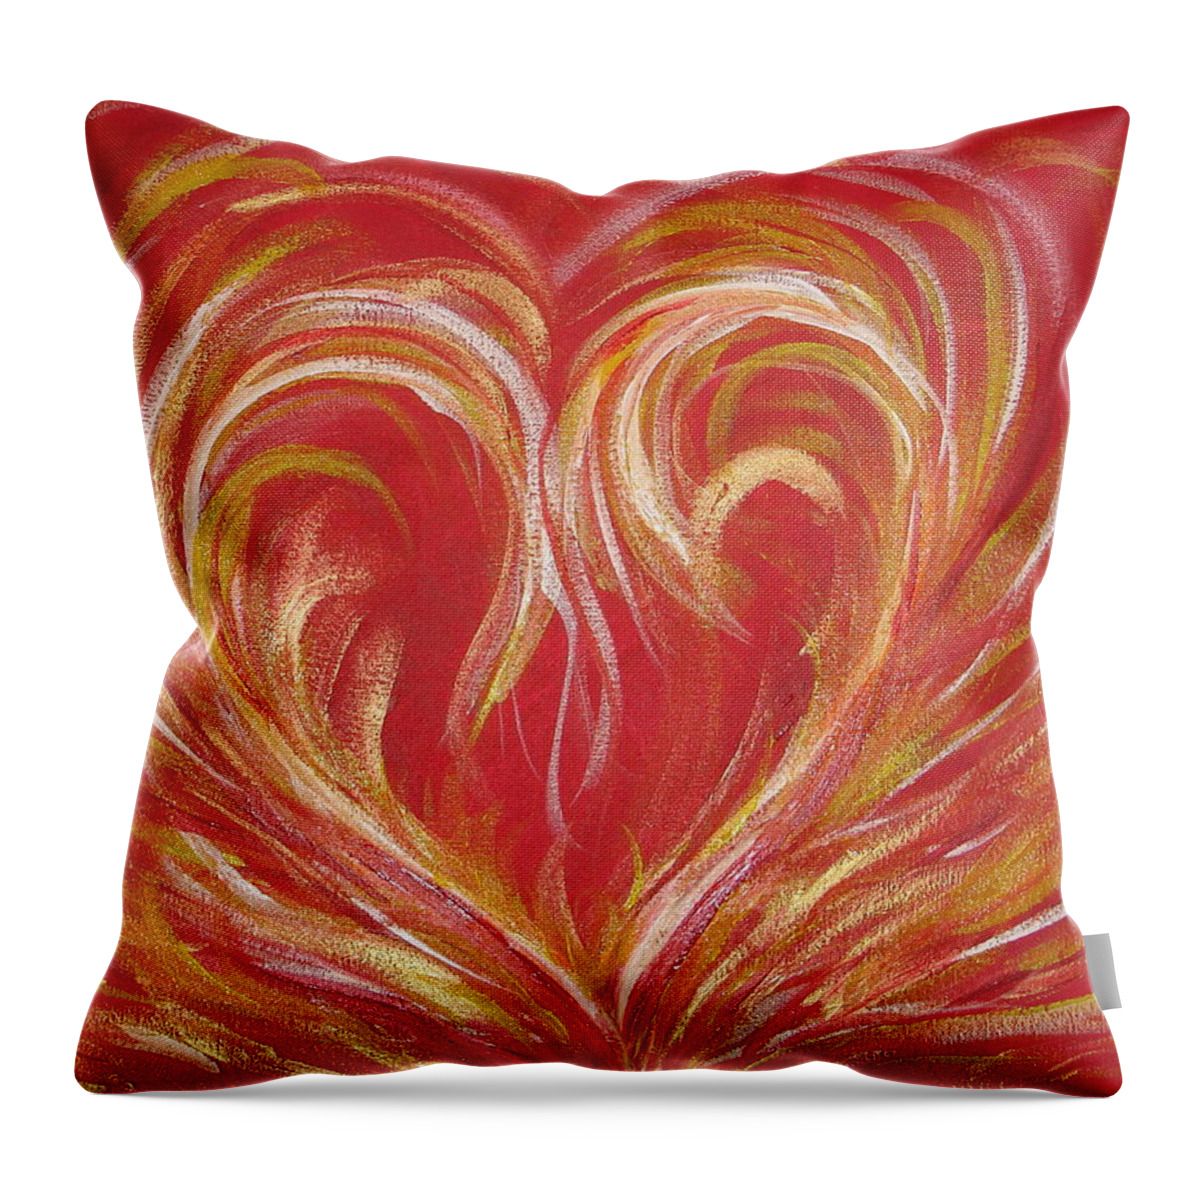 Burning Desire Throw Pillow featuring the painting Burning Desire by Angie Butler